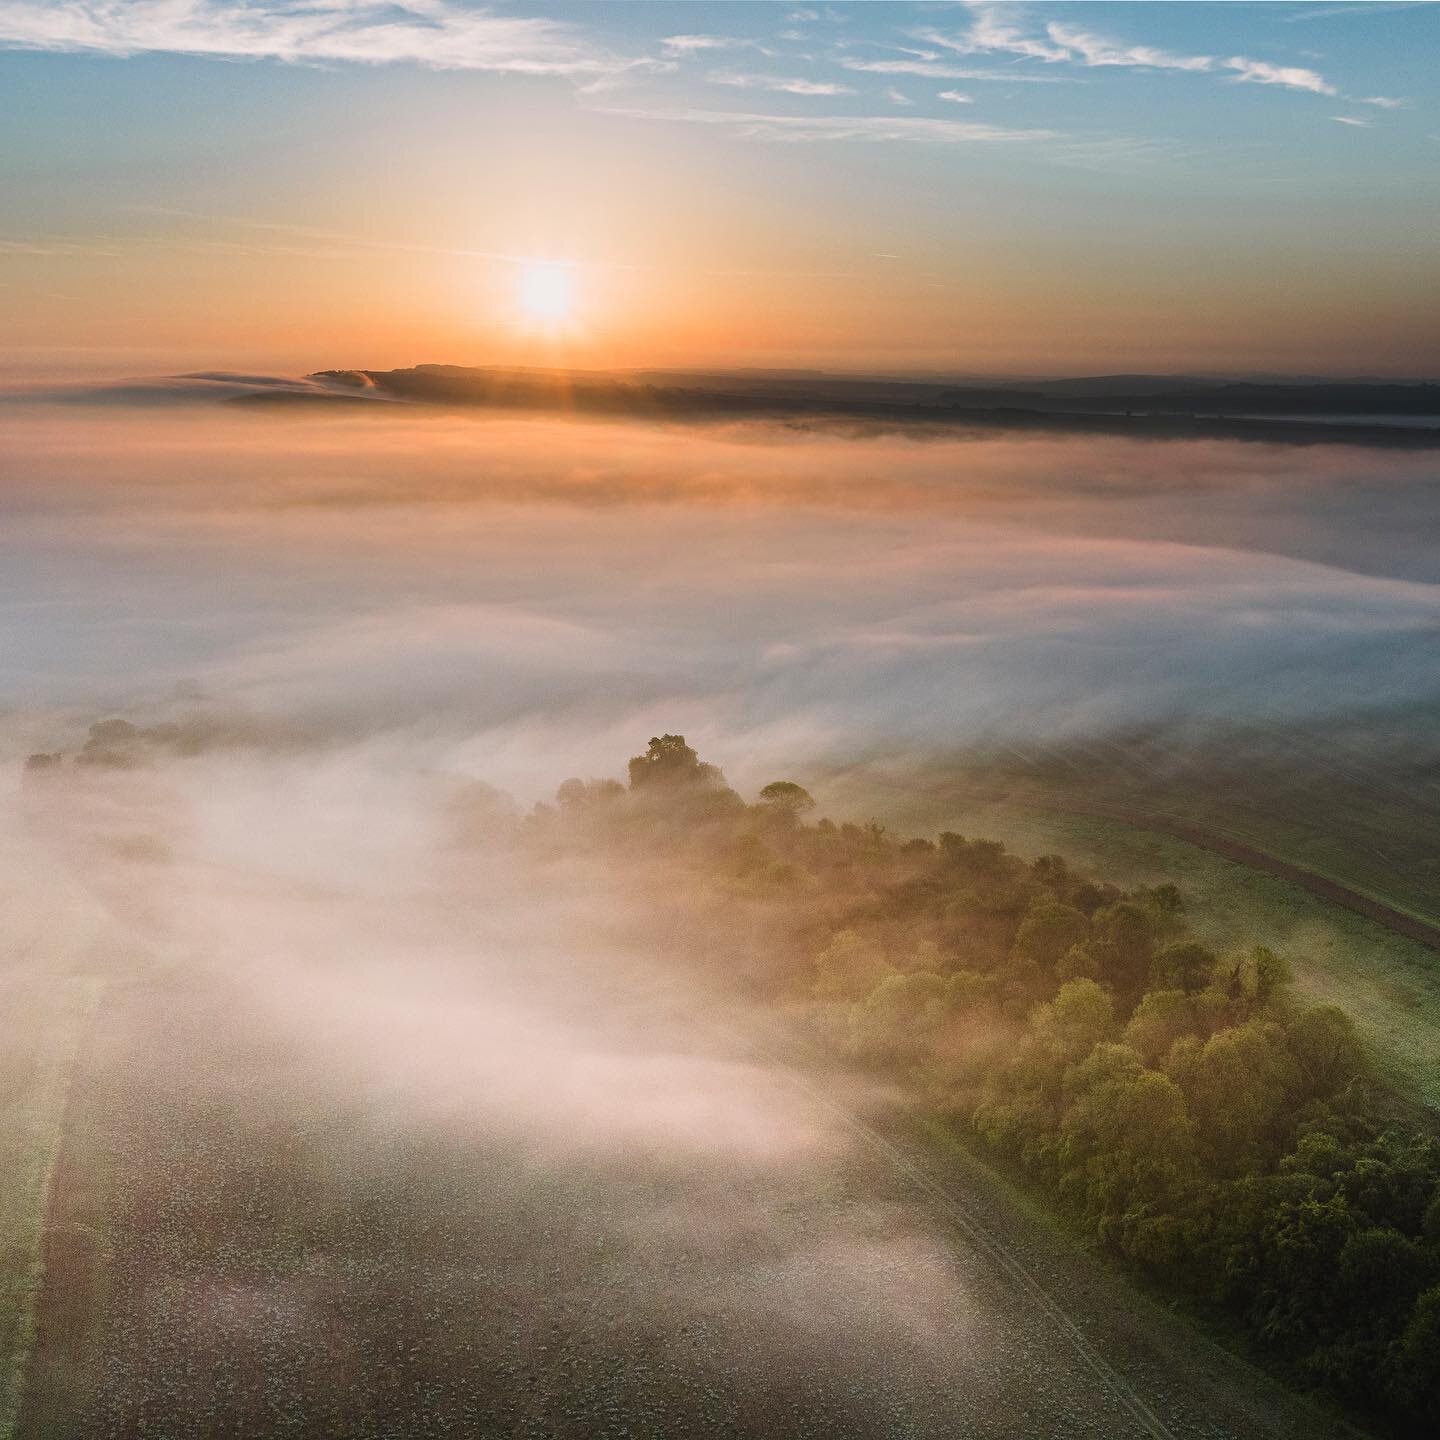 Moments of pure magic on the South Downs.  One of my very fav places to watch the sun rise this, and enjoyed having some additional elevation with the Mavic 3.
.
.
#sunrise
#foggysunrise 
#southdowns
#westsussex
#goldensun 
#fog
#mist
#foggylandscape